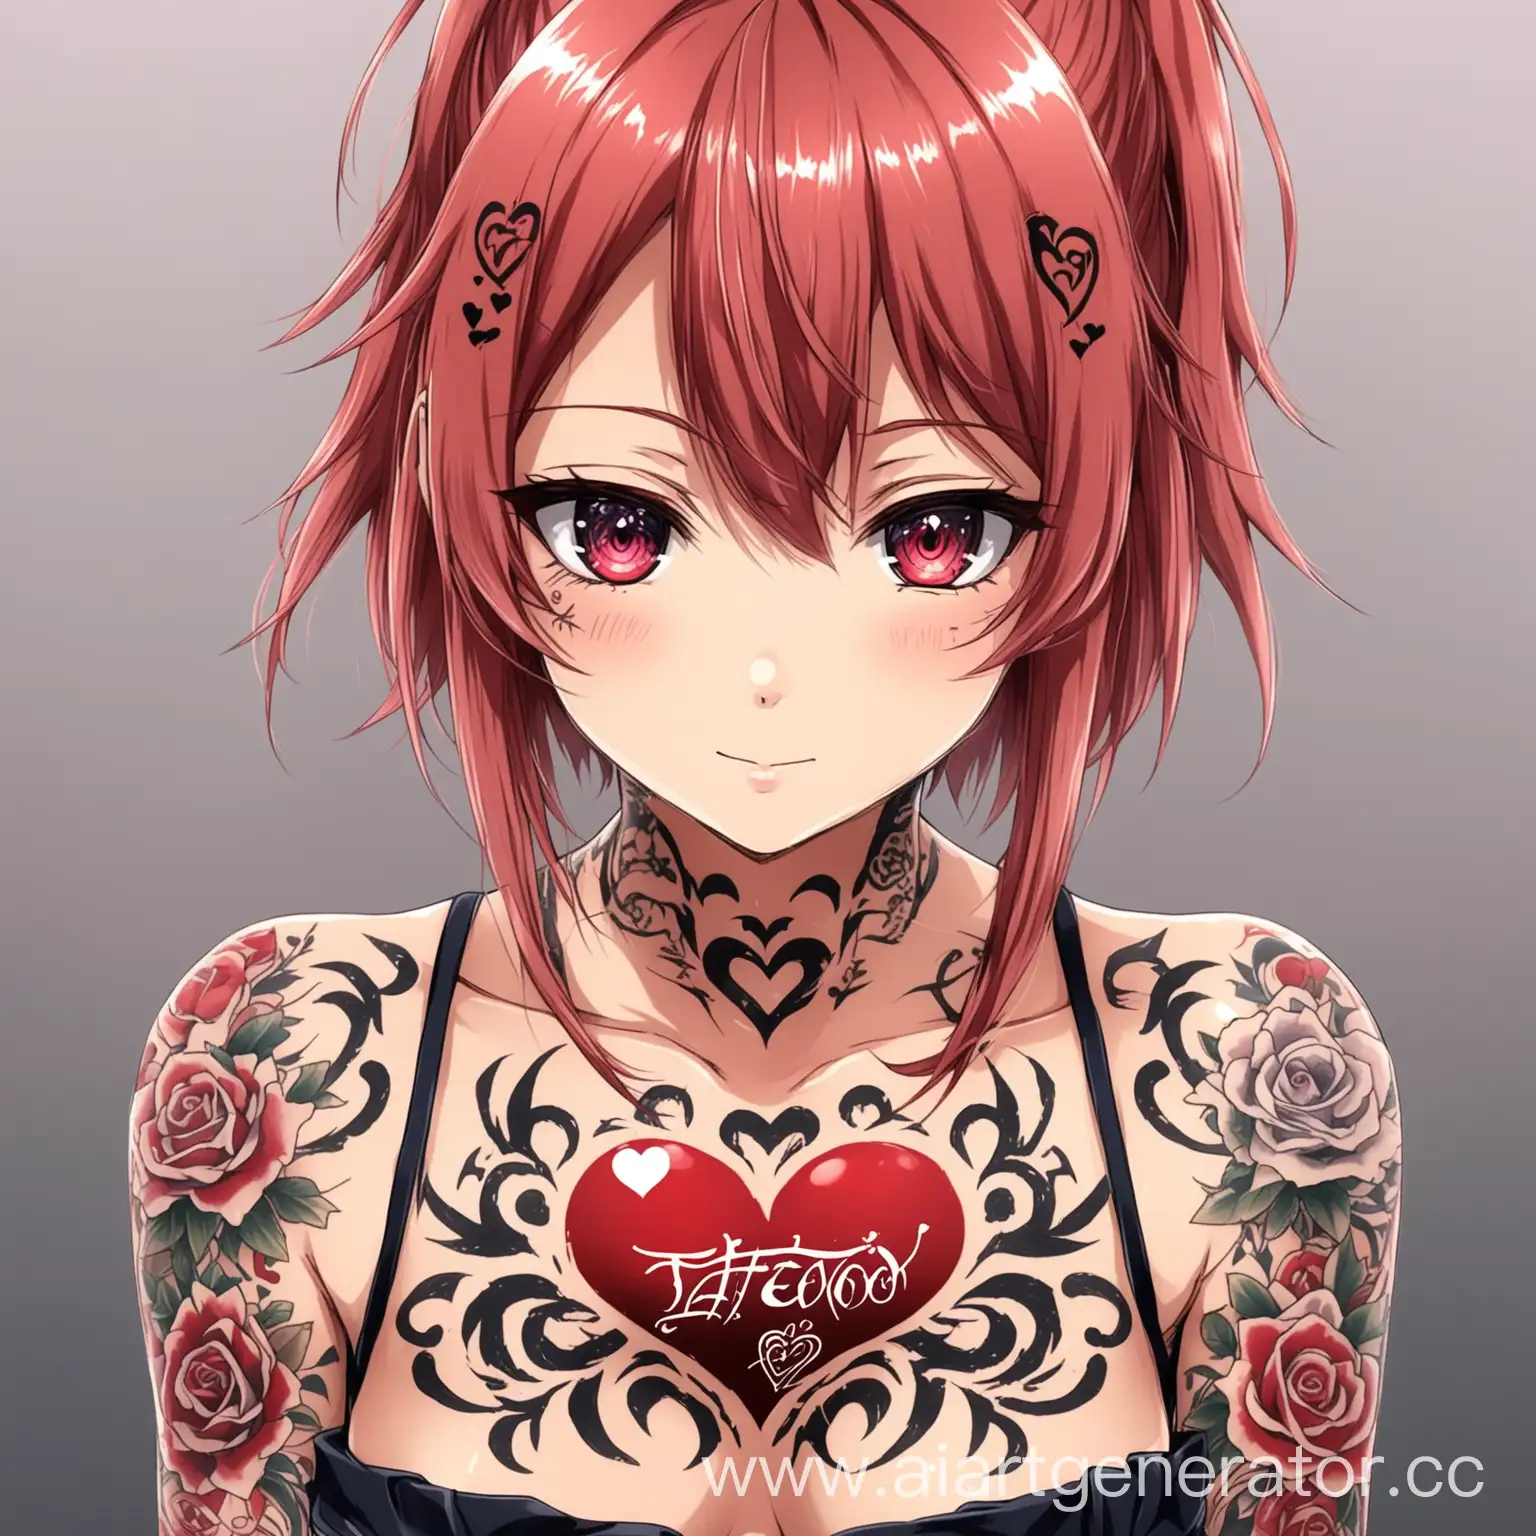 Anime-Girl-with-Tattooed-Heart-Vibrant-Illustration-of-a-Tattooed-Heart-on-a-Stylish-Anime-Girl